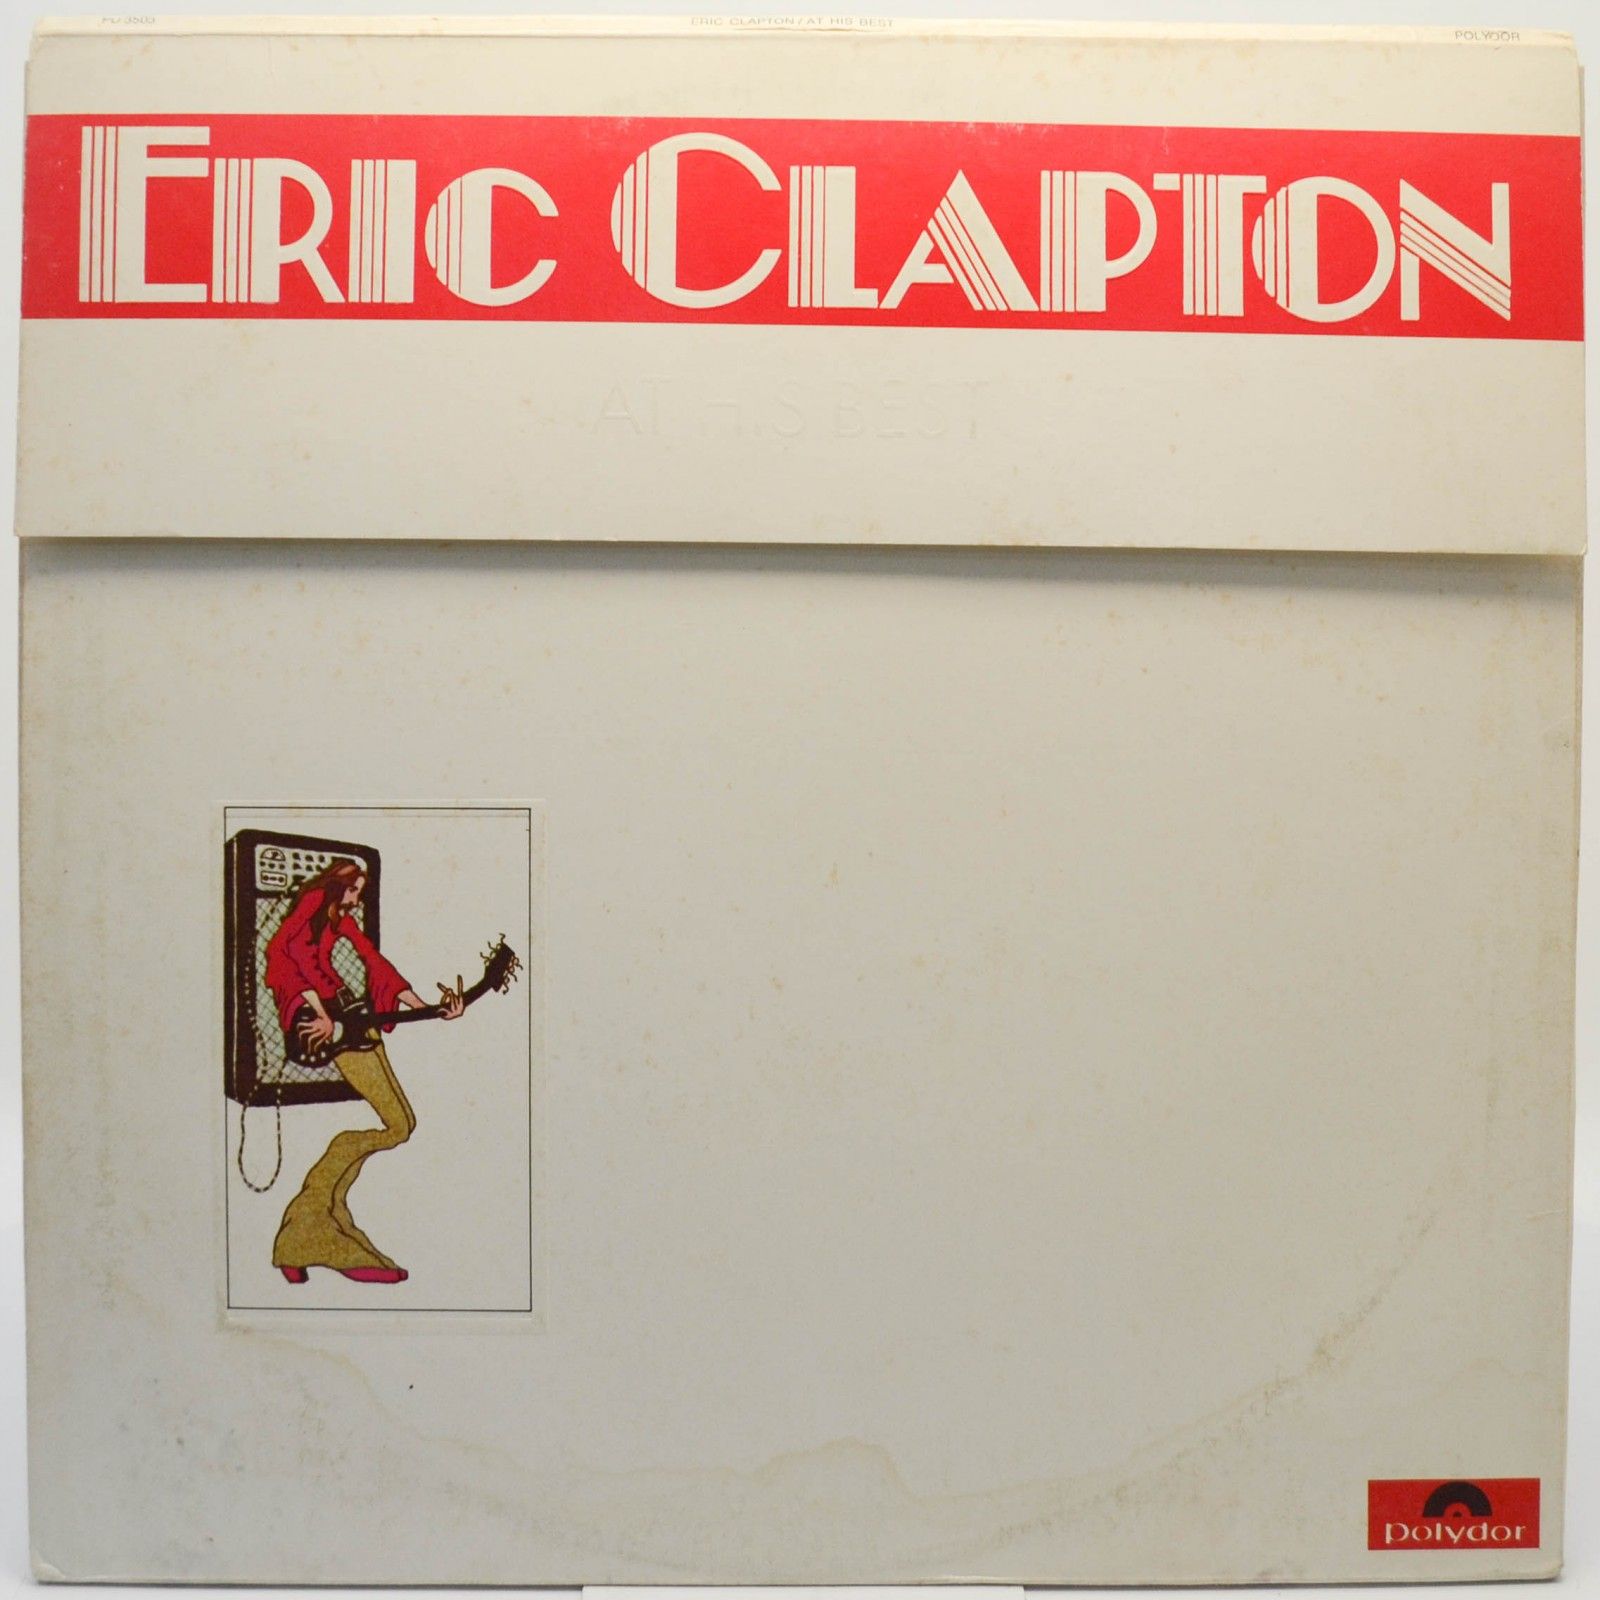 Eric Clapton — At His Best (2LP, USA), 1972